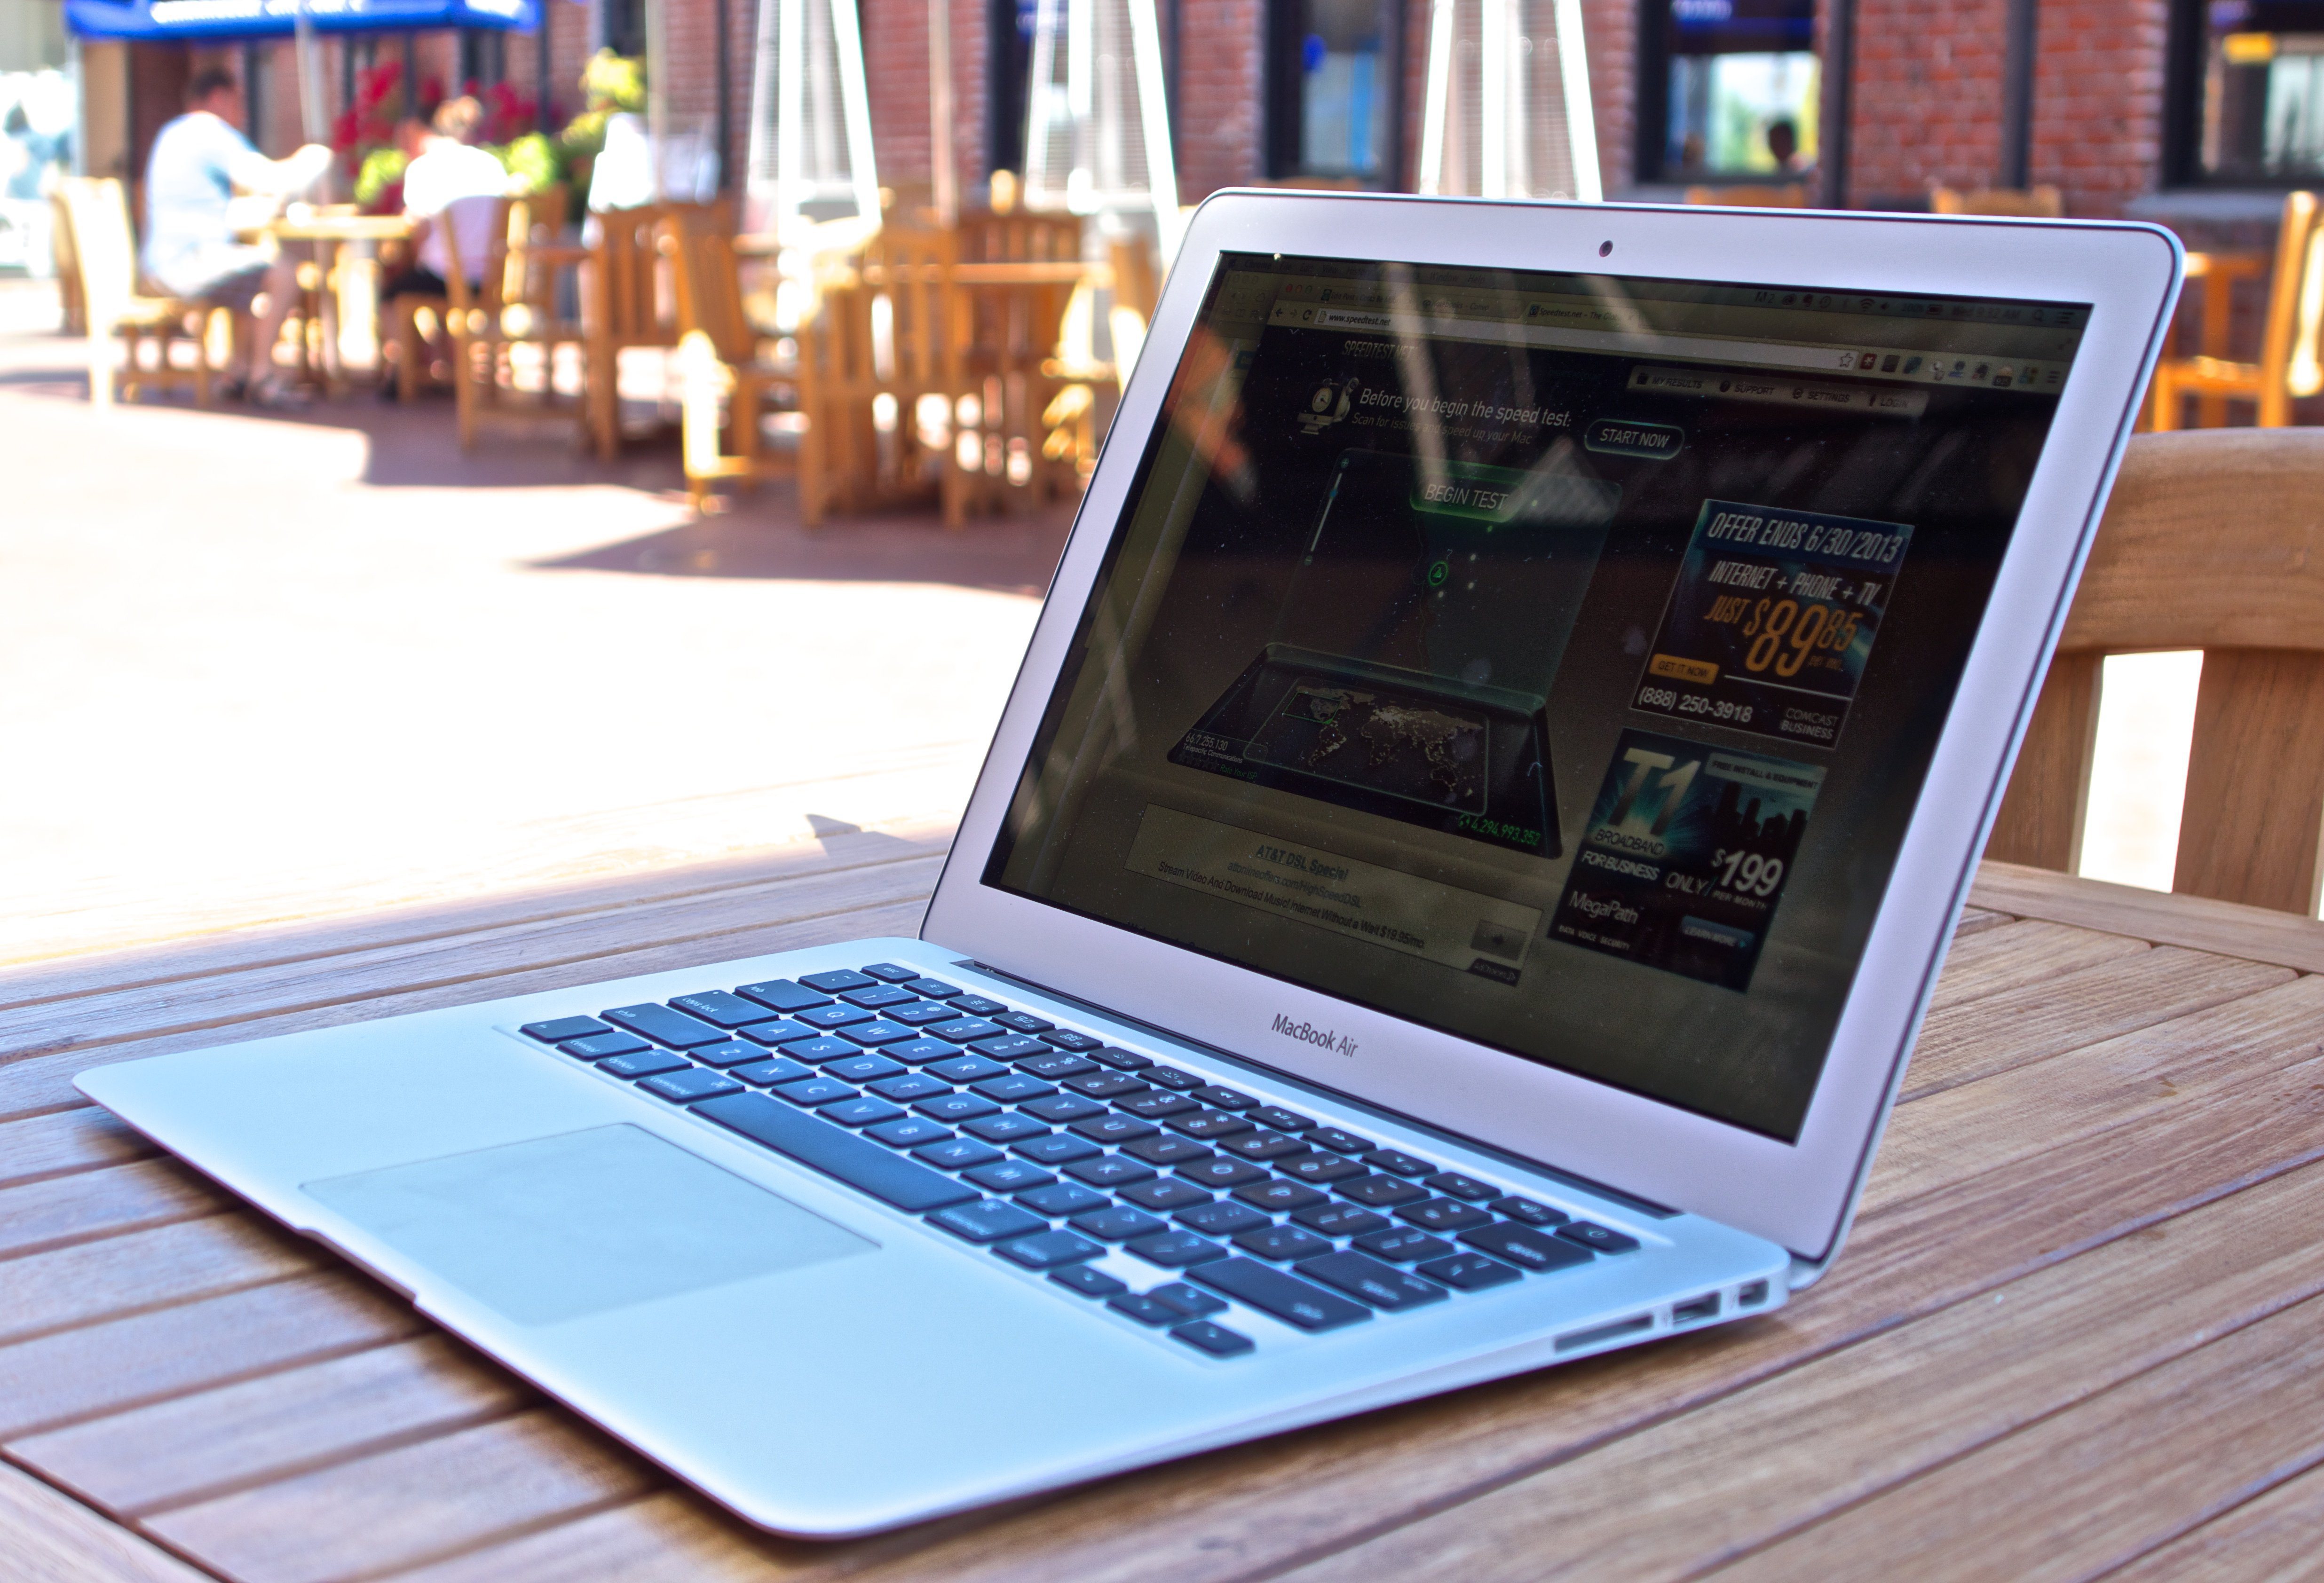 Here are the best MacBook Black Friday 2015 deals.